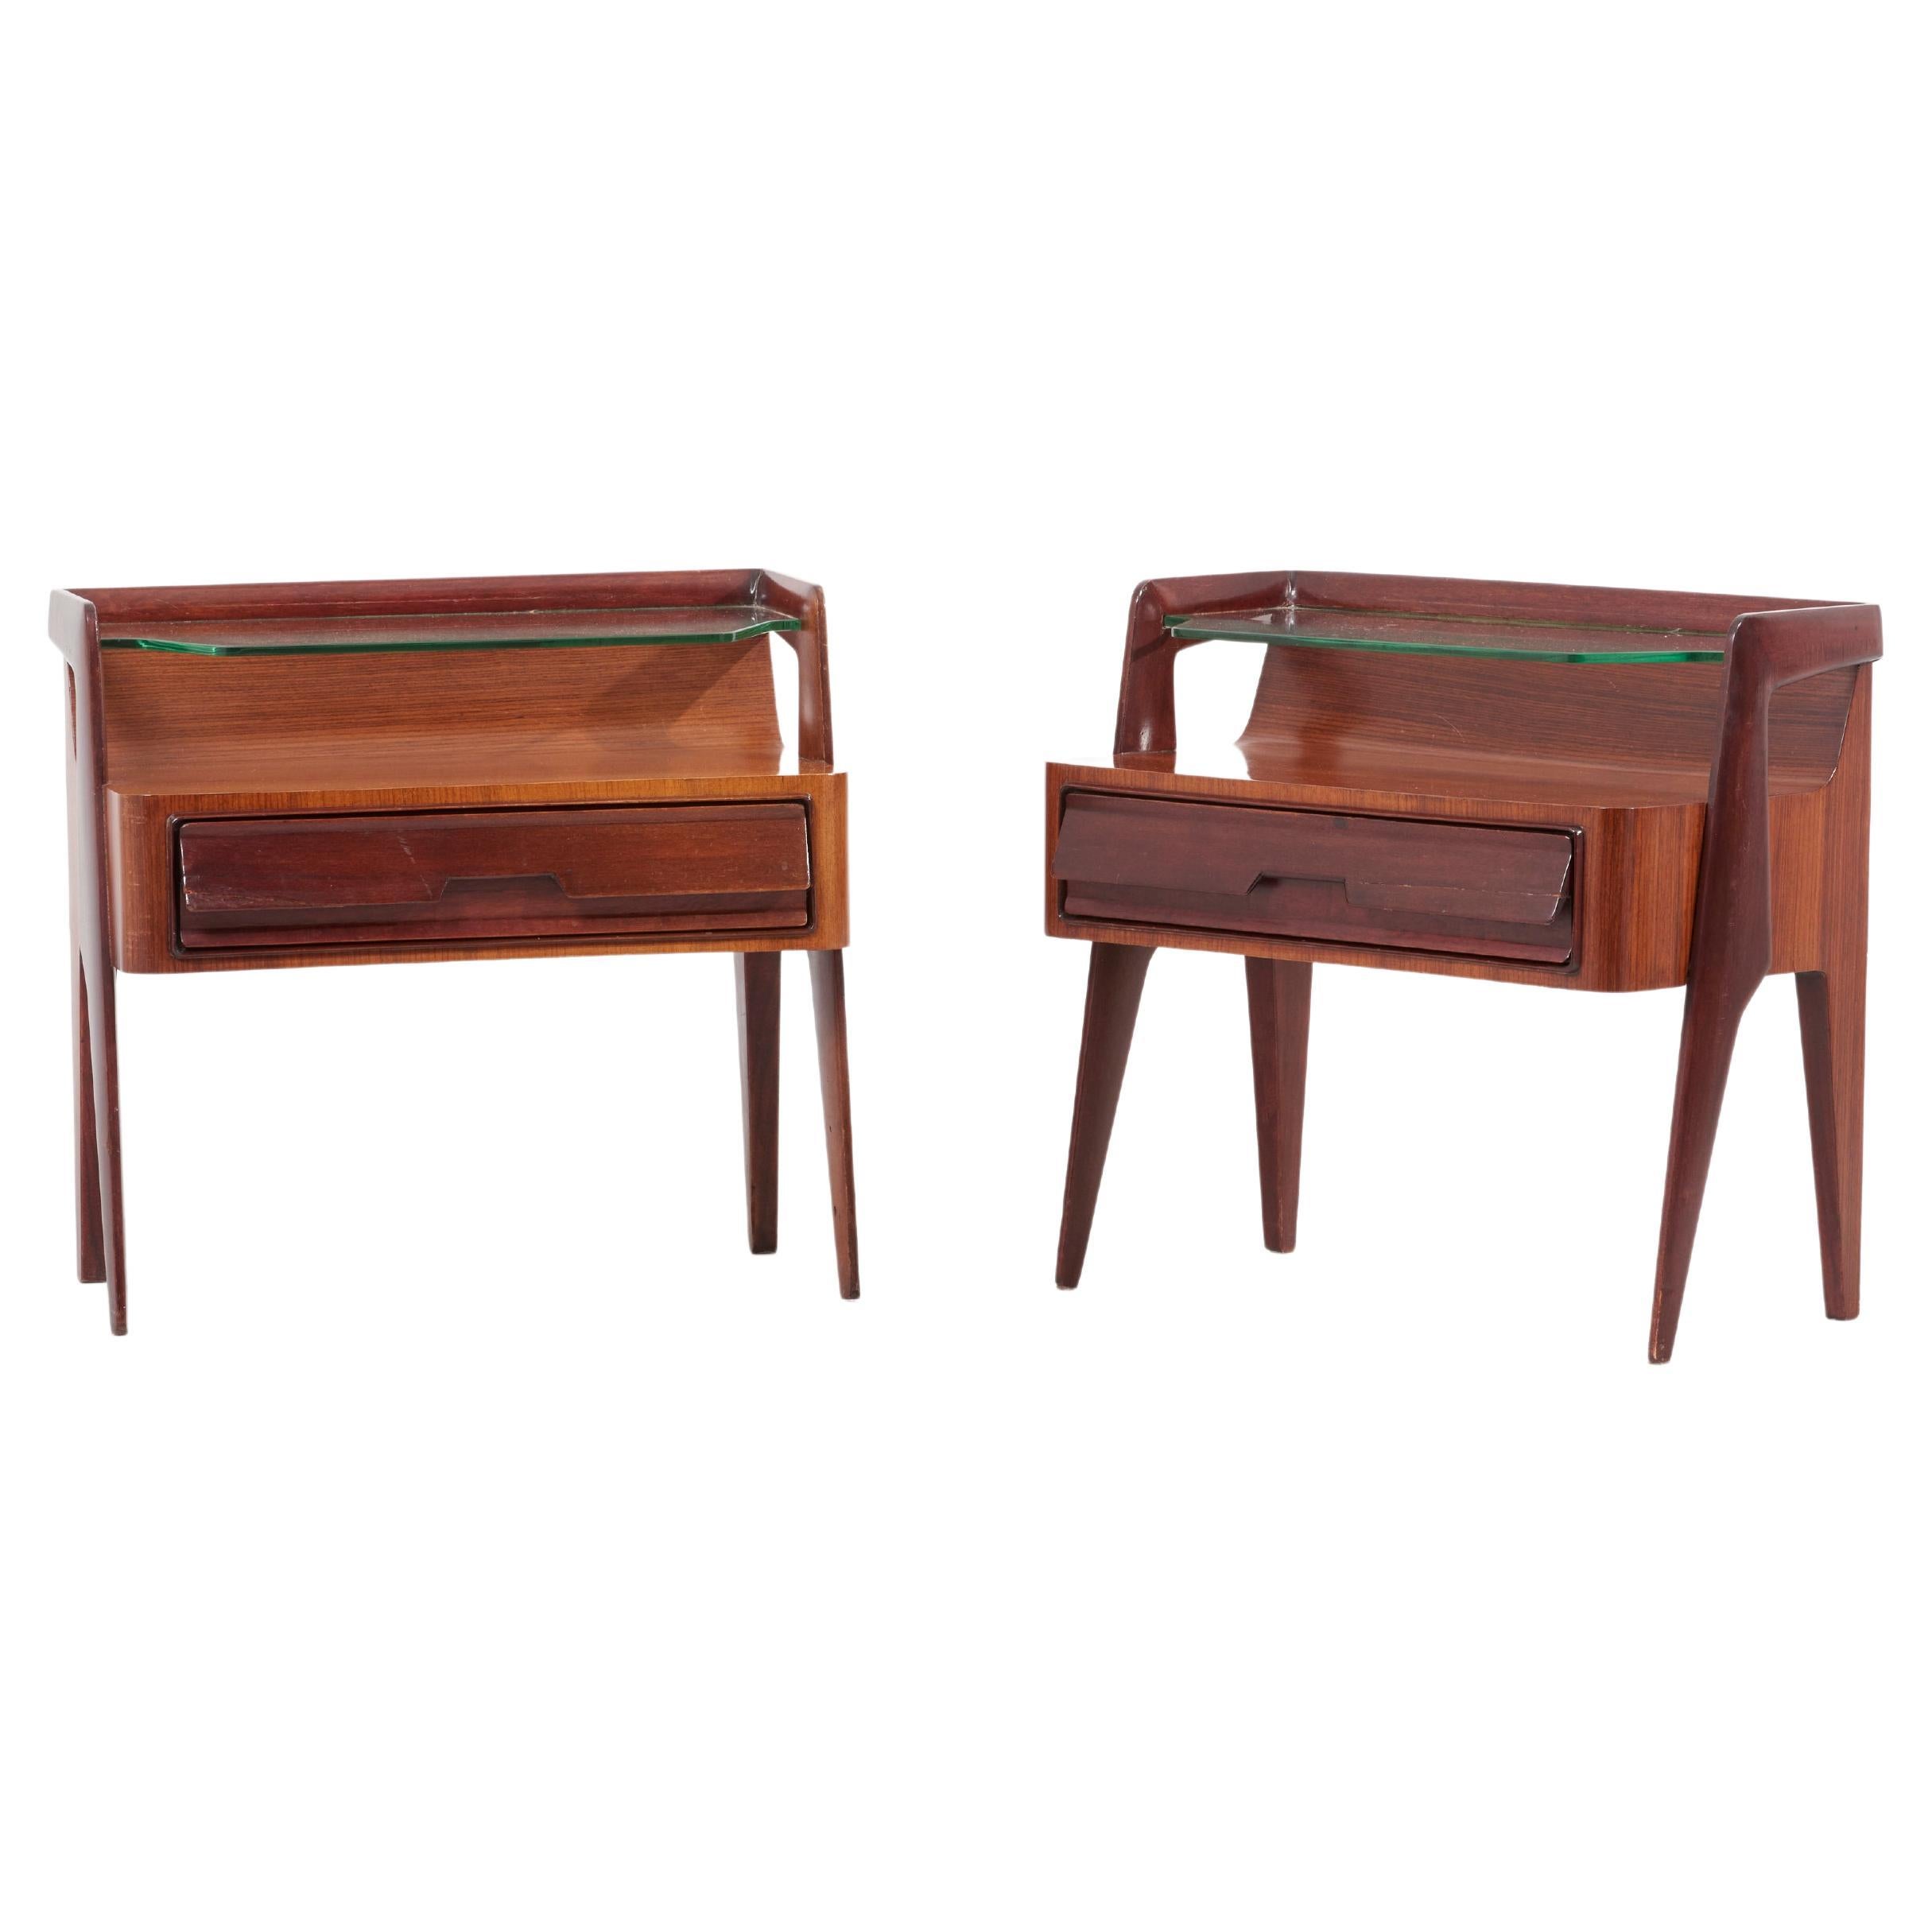 Pair of Italian 1950s Night Stands or Bed Side Tables in Teak Plywood, Mahogany